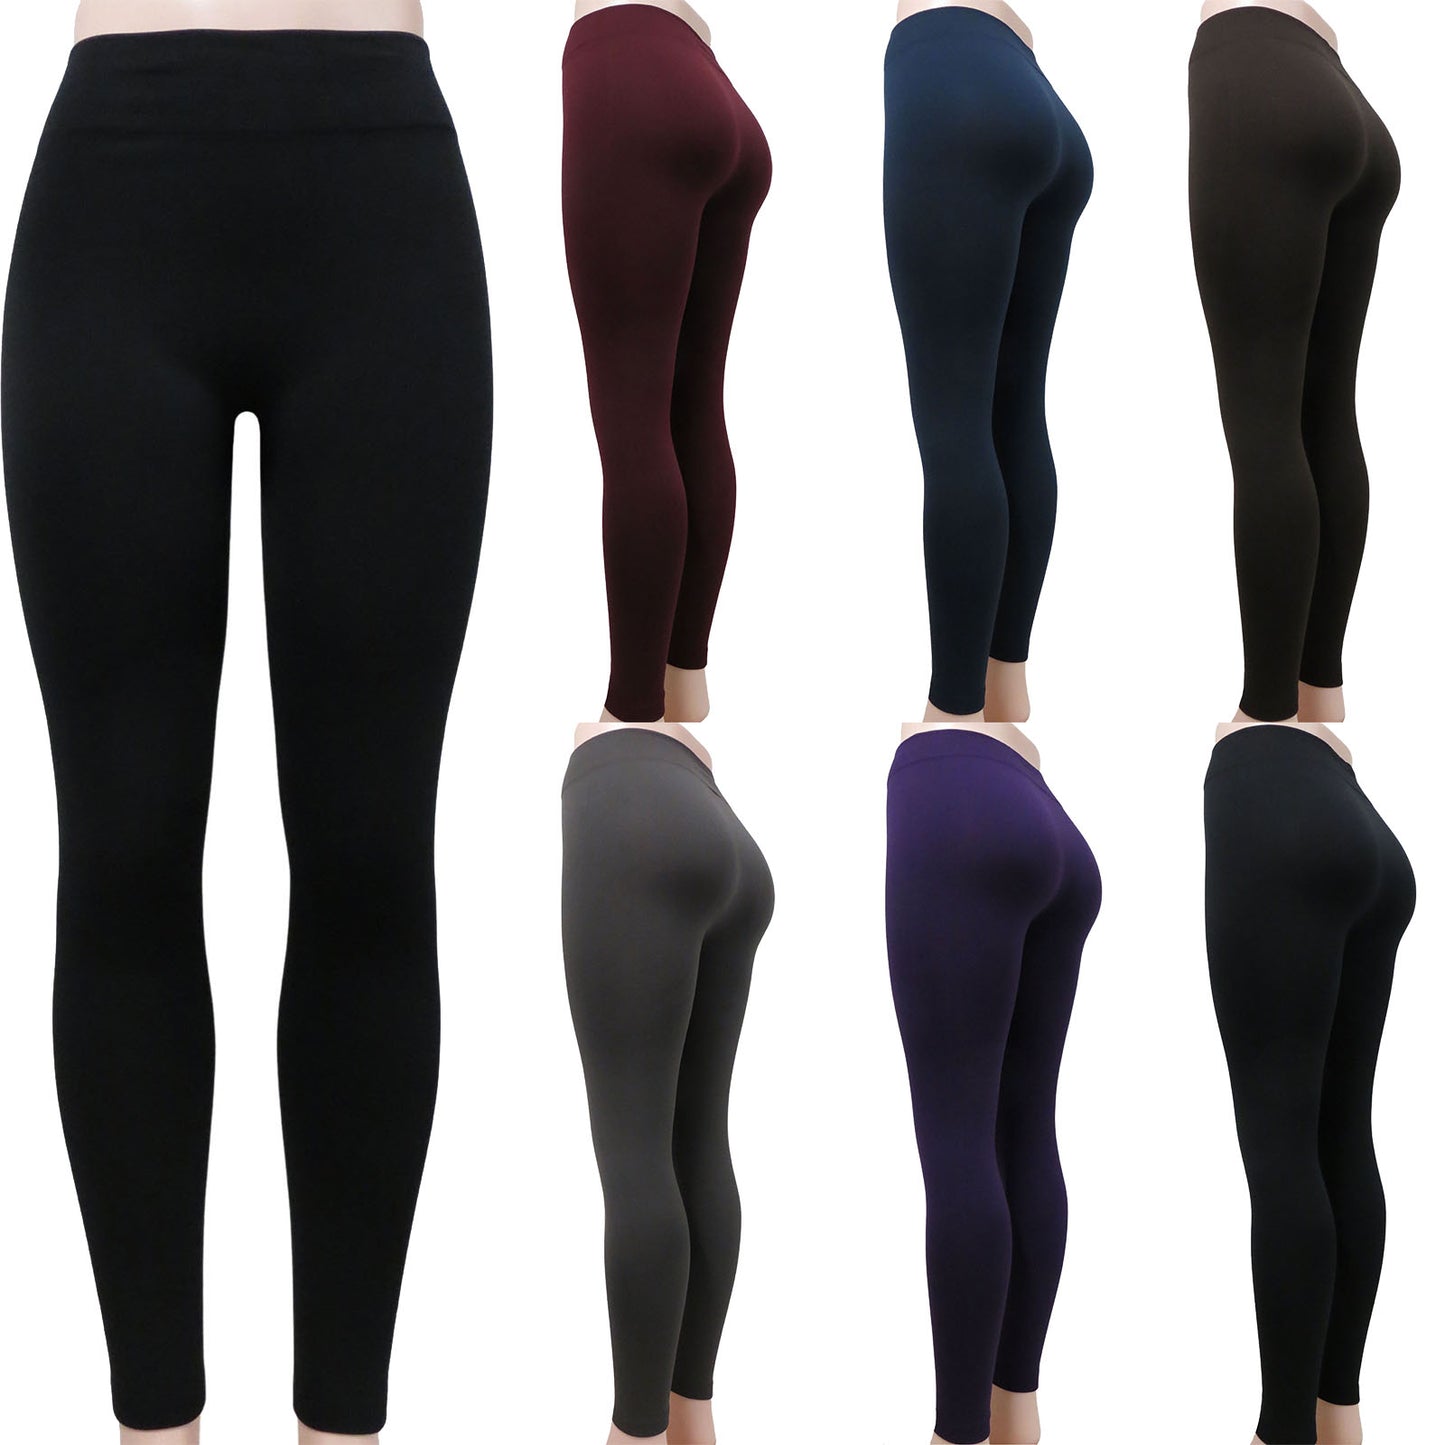 ITEM NUMBER: AP720-THERESA-ASST (12 PIECE PACK WAS $3.00 - CLEARANCE JUST $2.00 / PIECE) FLEECE LEGGINGS ASSORTED COLOR PACK